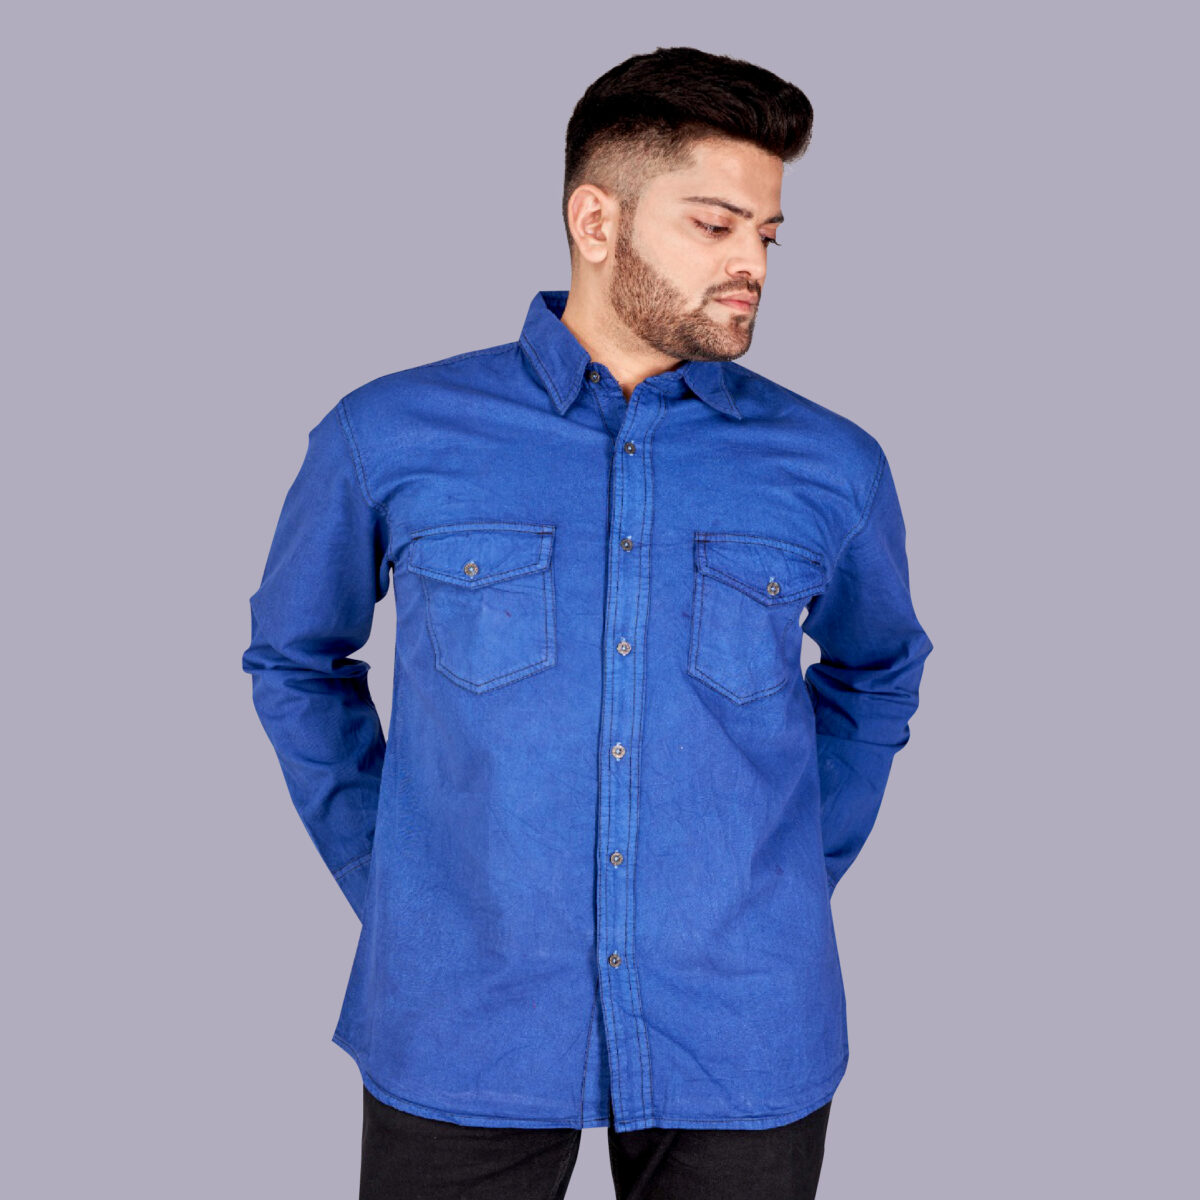 Which denim shirt color is suitable for fair skinny men?